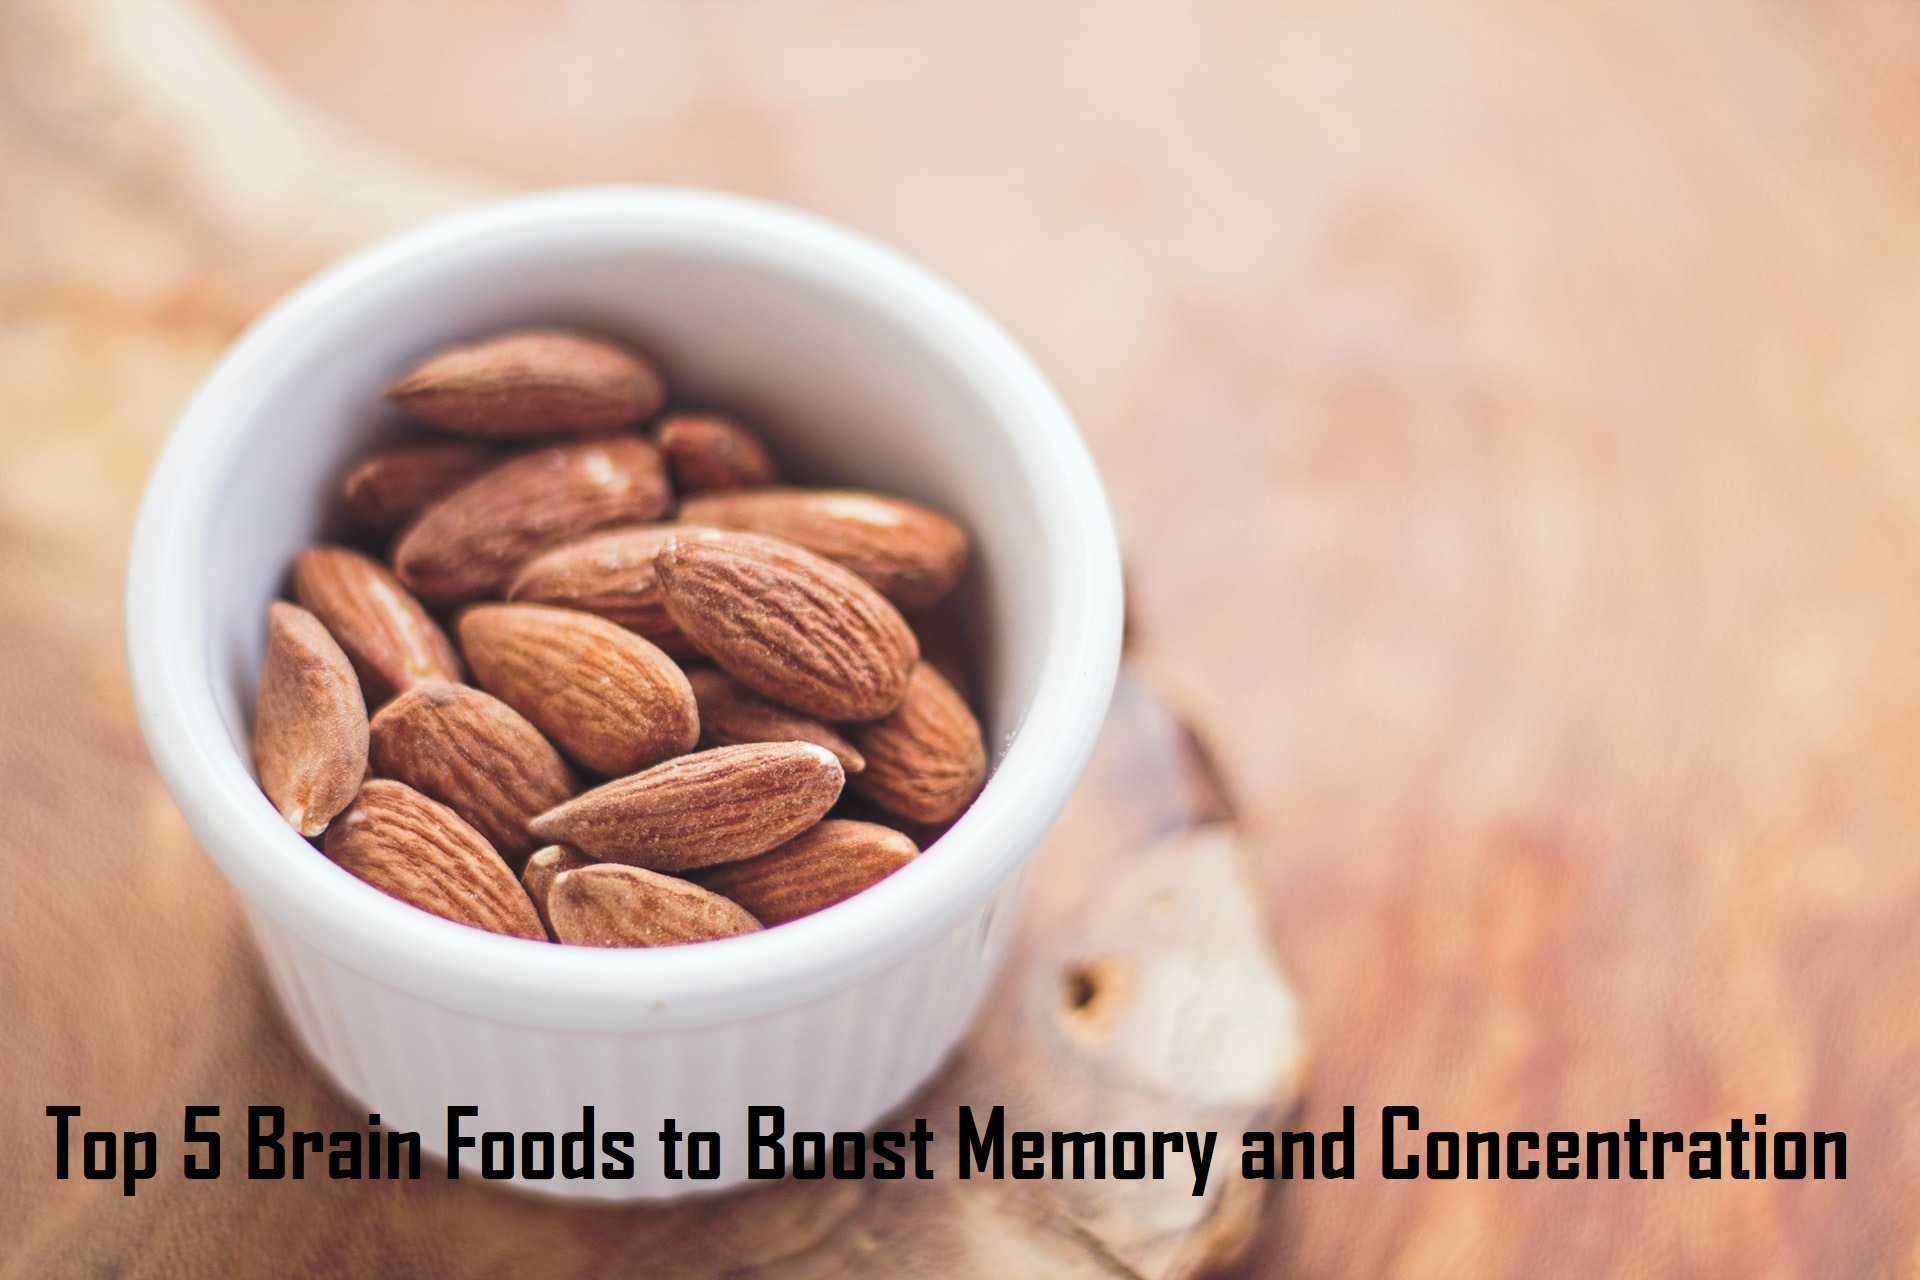 5 Brain Foods to Boost Memory and Concentration